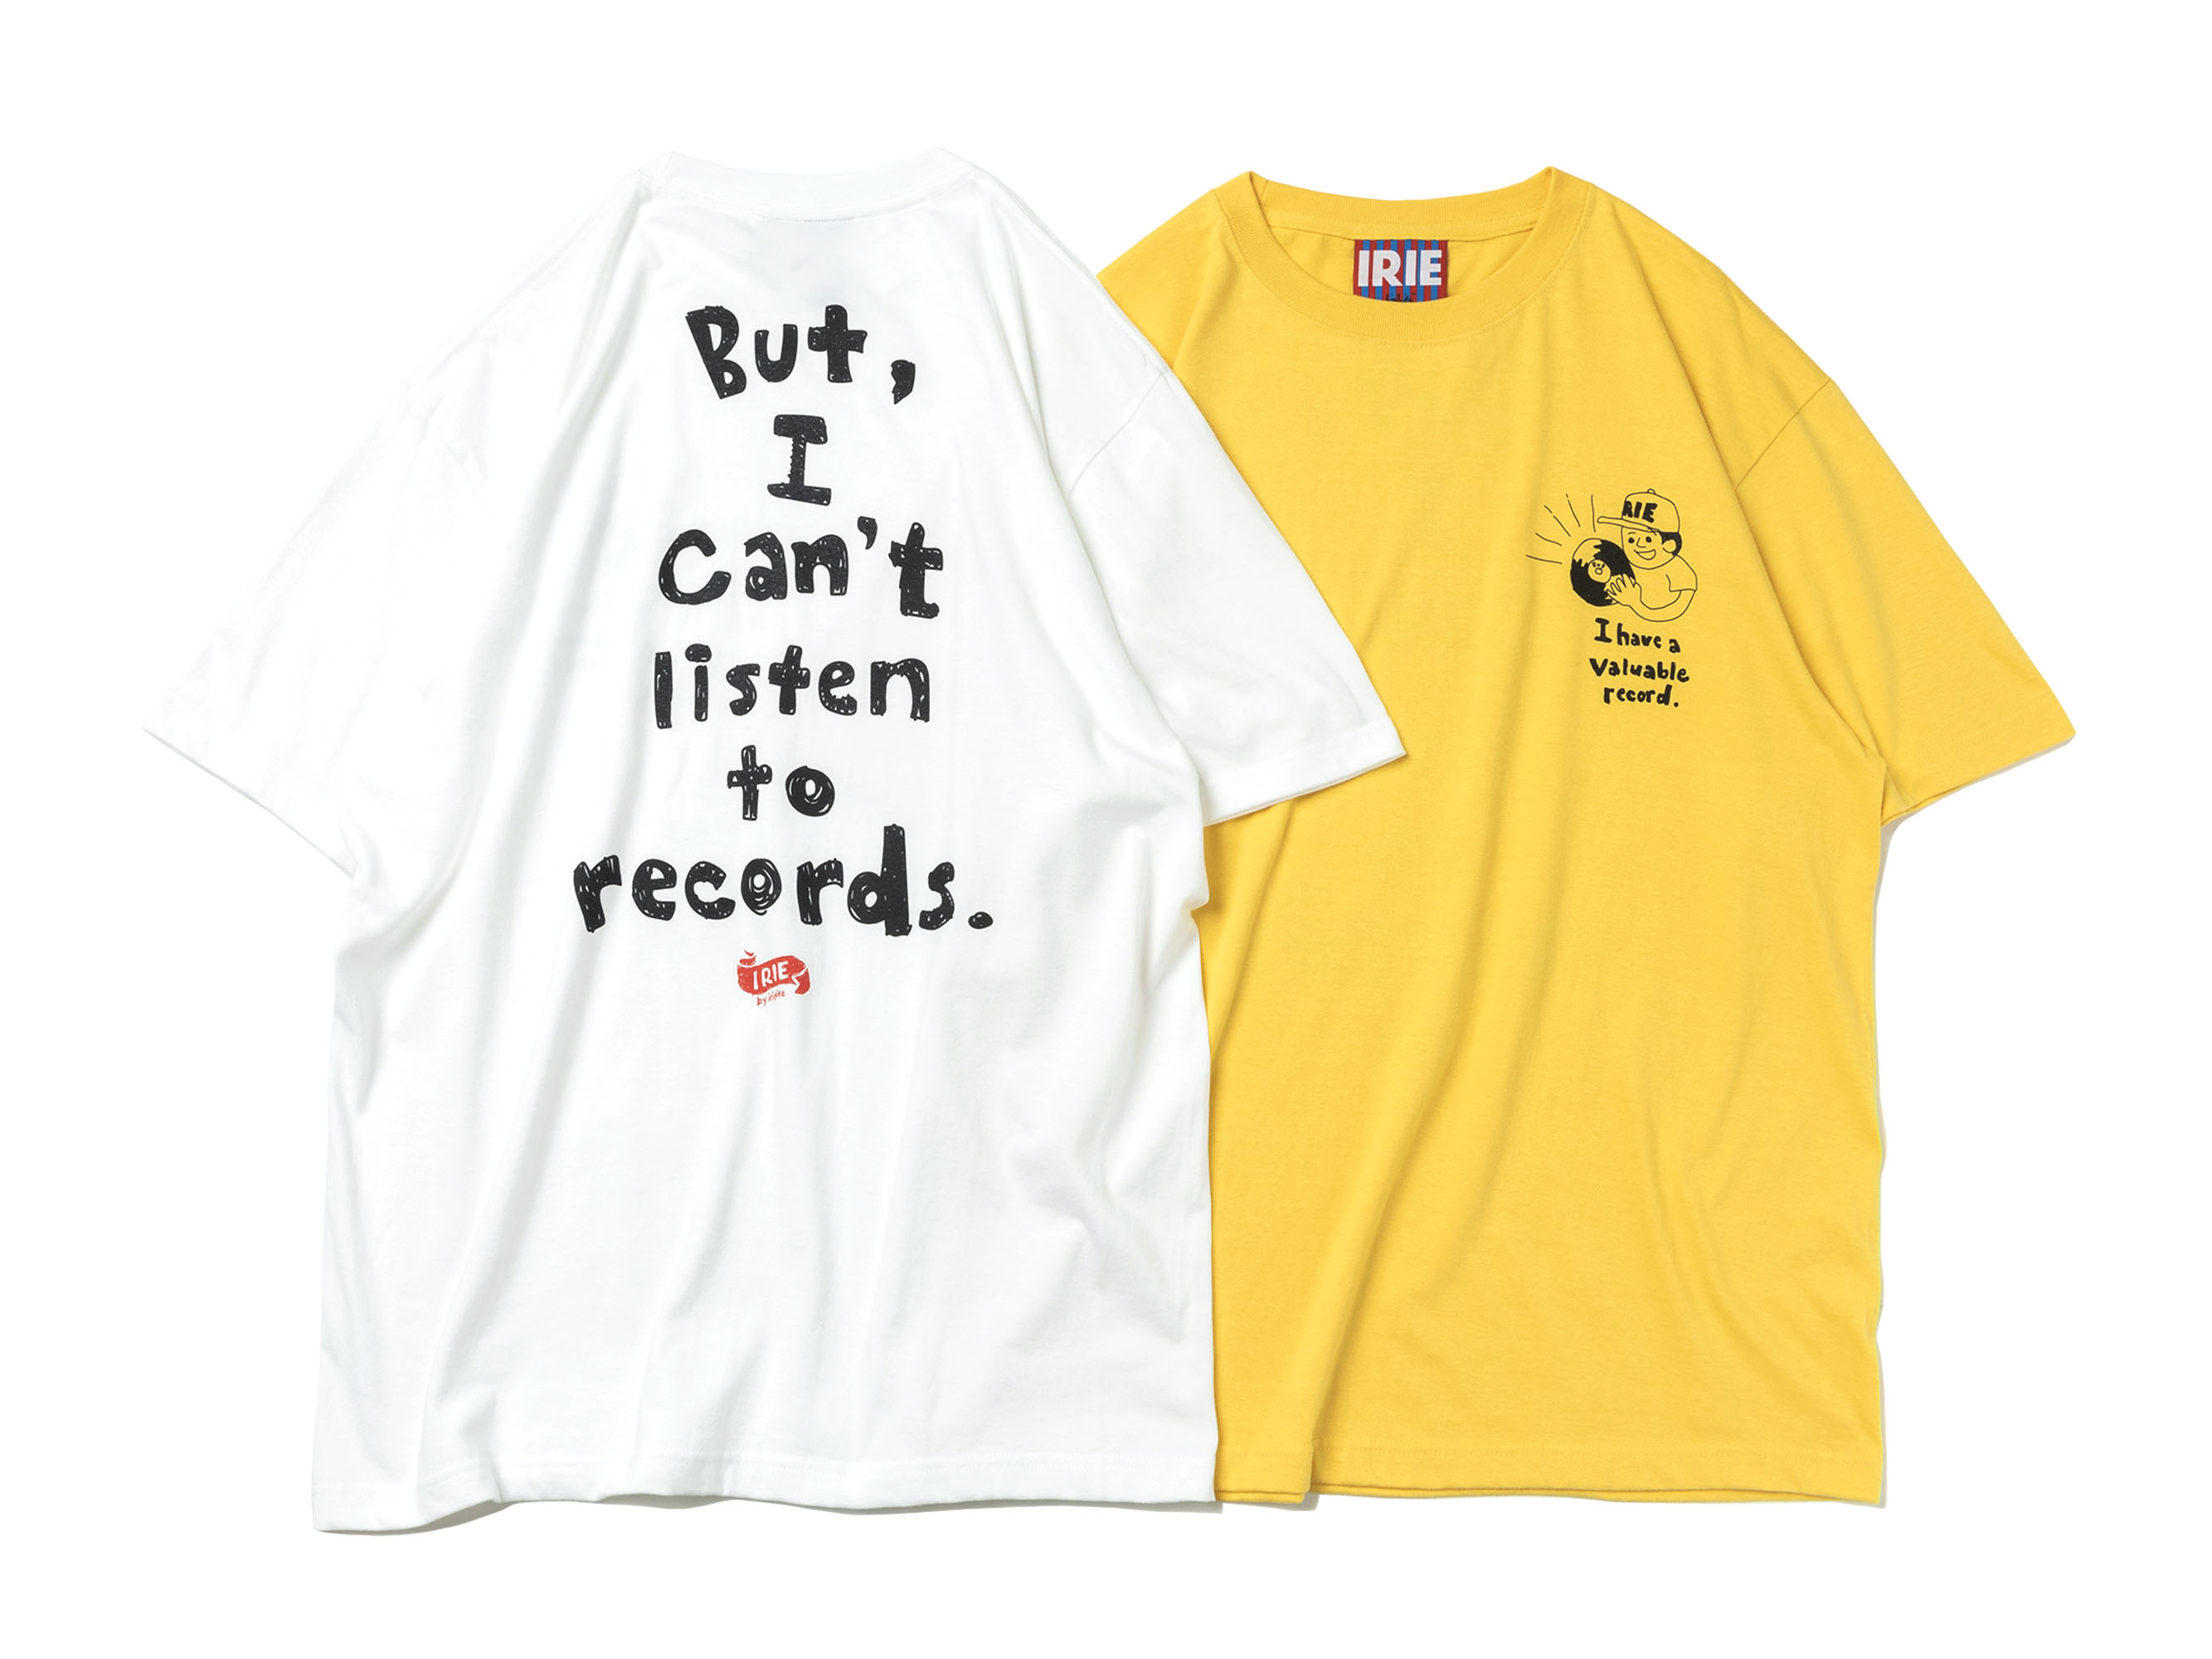 【30%OFF】RECORD BOY TEE - IRIE by irielife